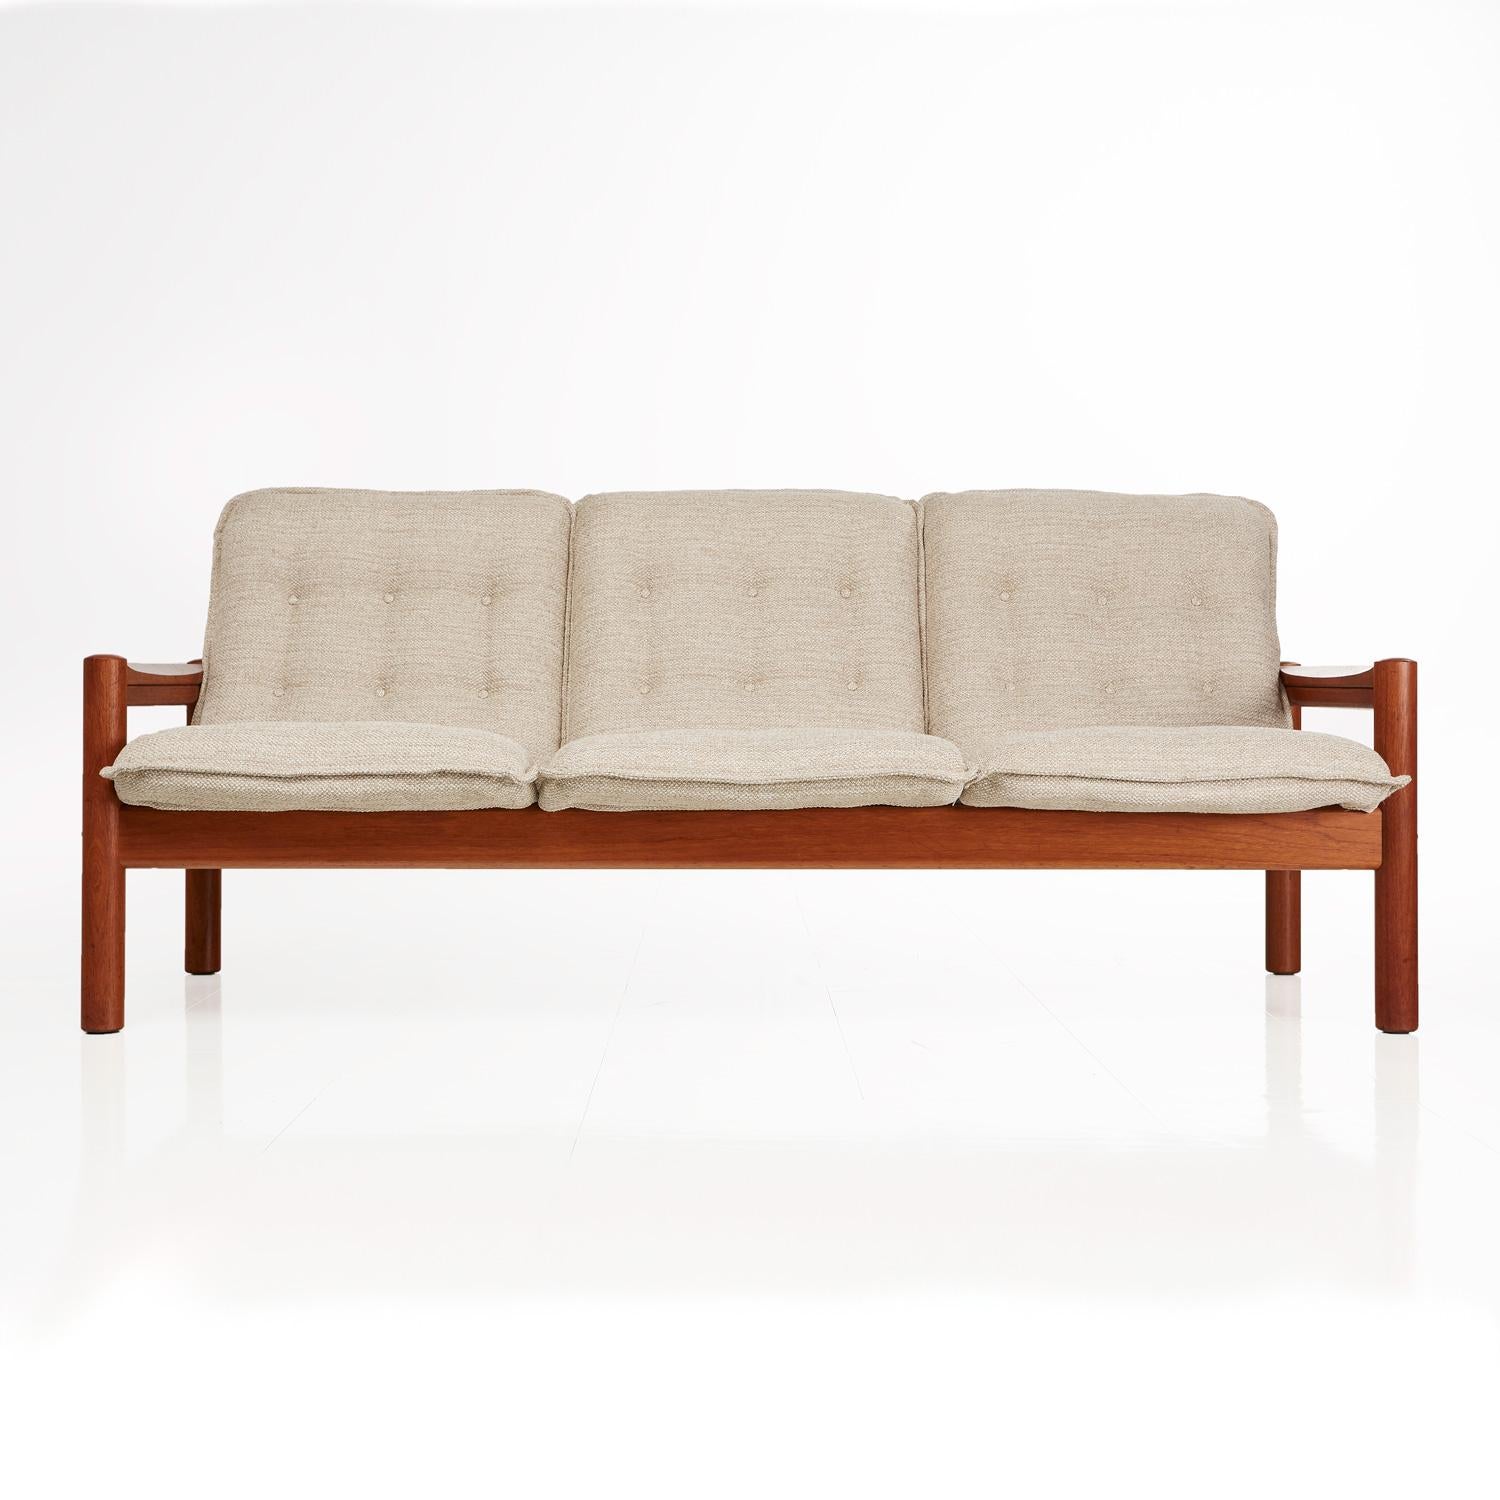 Domino Mobler three-seat couch restored to near mint condition. Solid teak frame with rigid construction. The sculpted arms stand out within the sleek, Minimalist, modern, low profile design. Button tufted in the original pattern. This piece is a